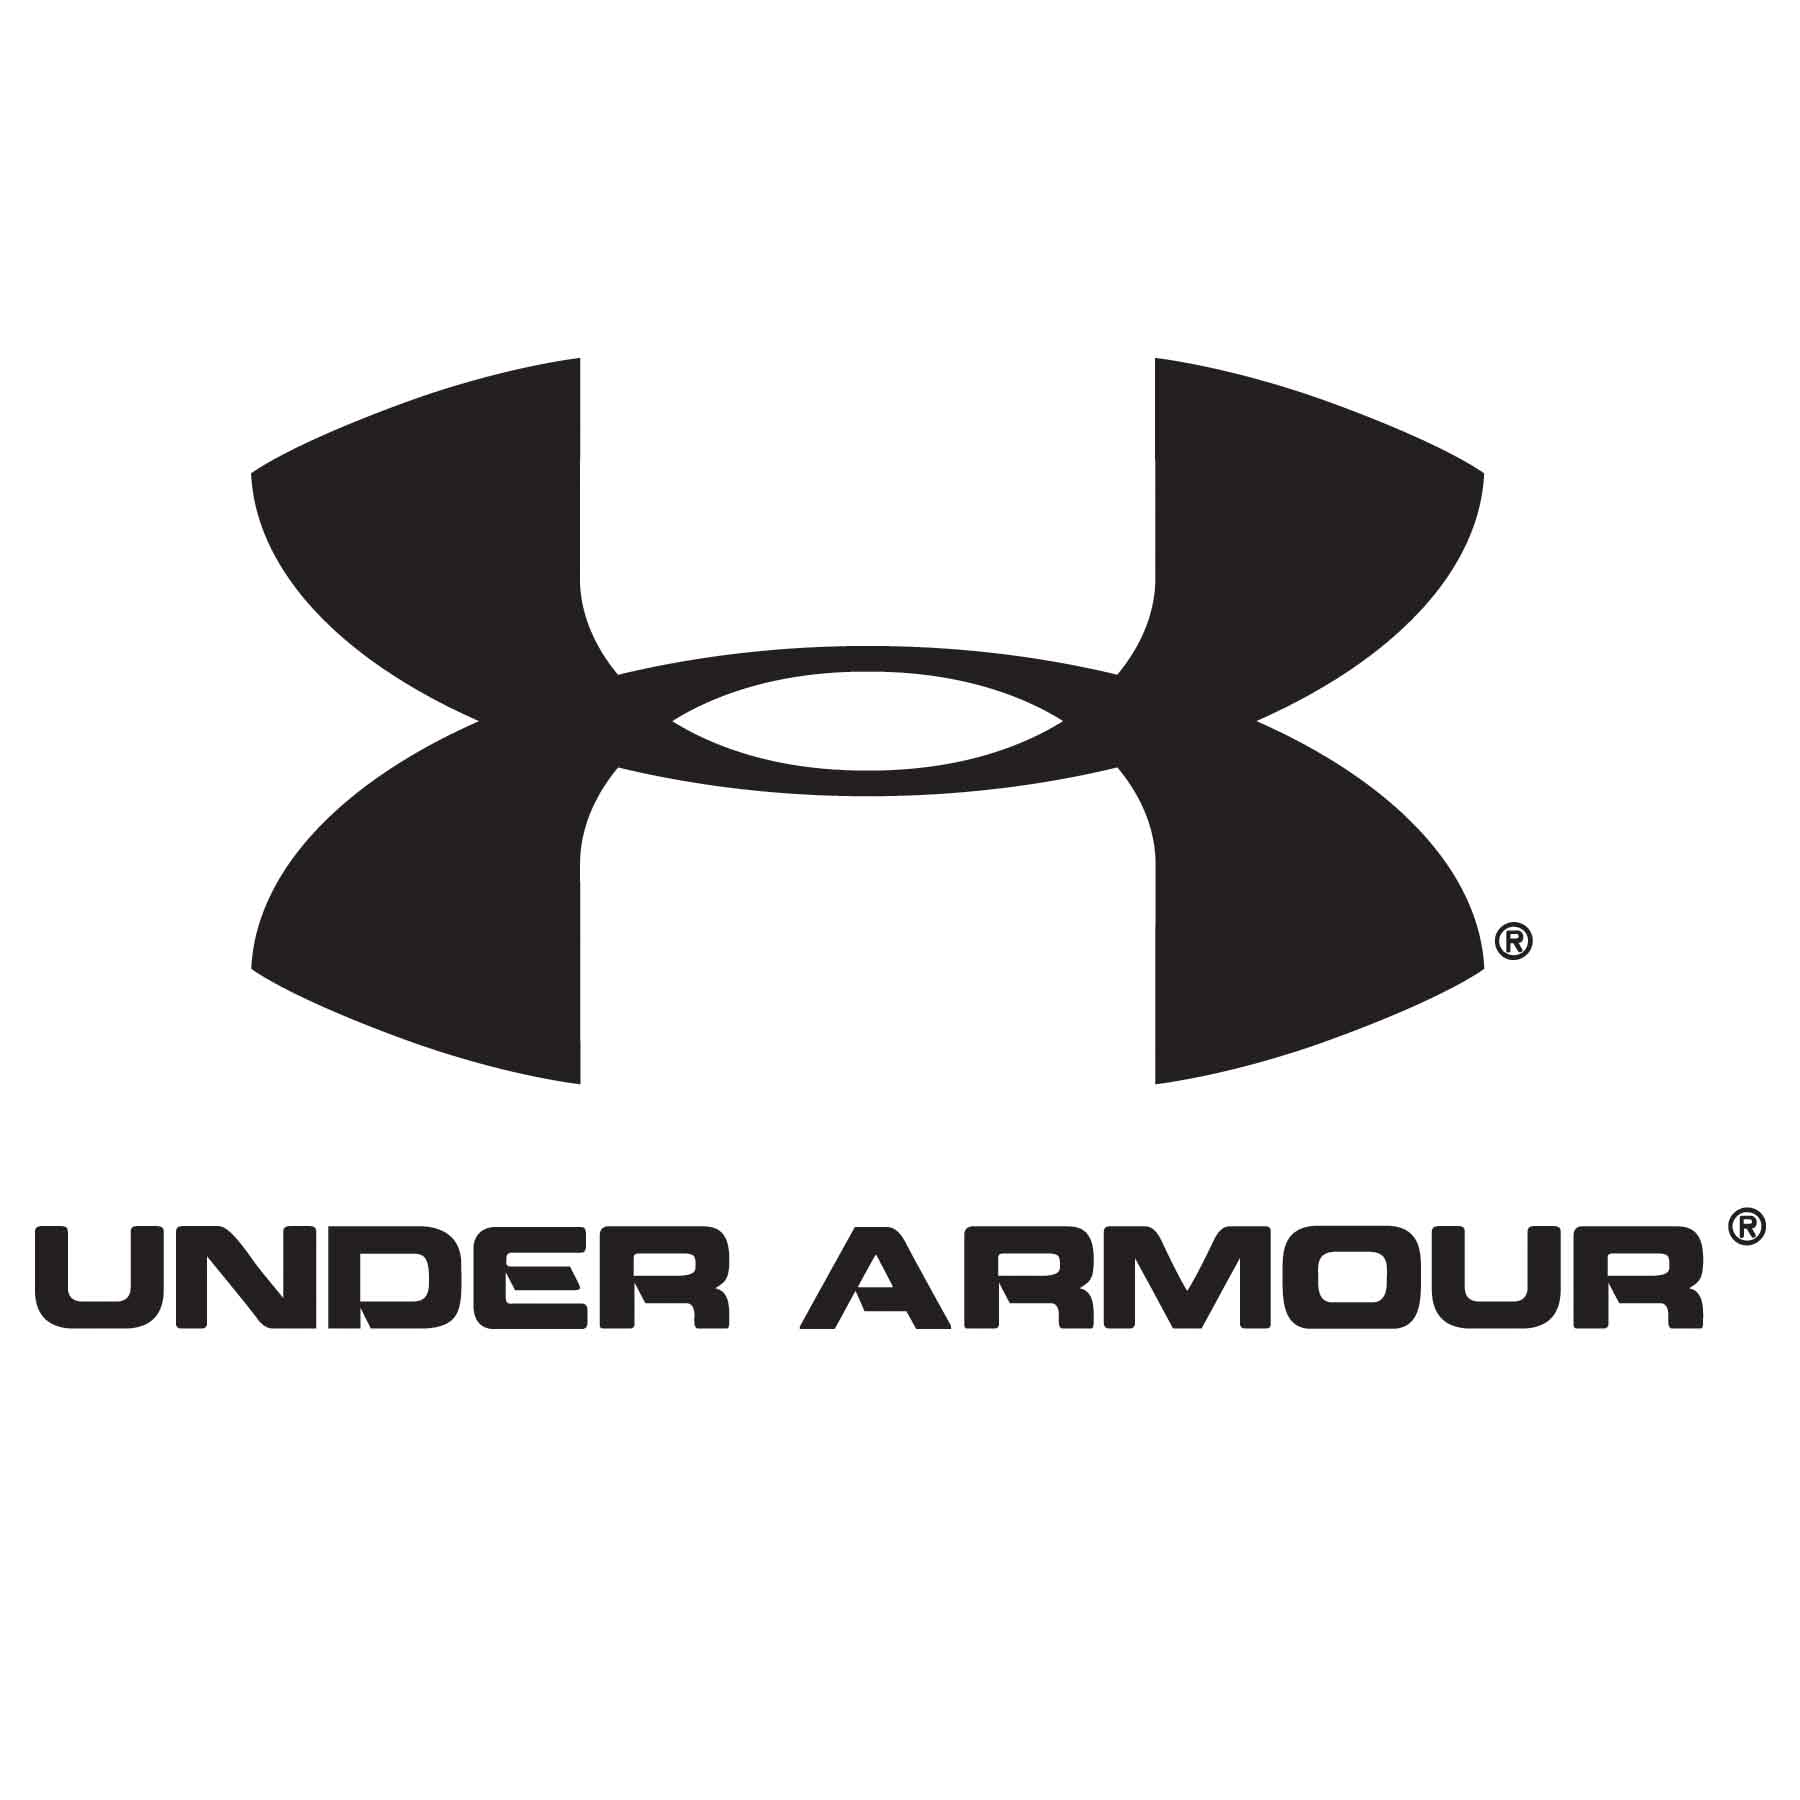 Up to 70% Off Under Armour Women Clothing Sale @ 6PM.com